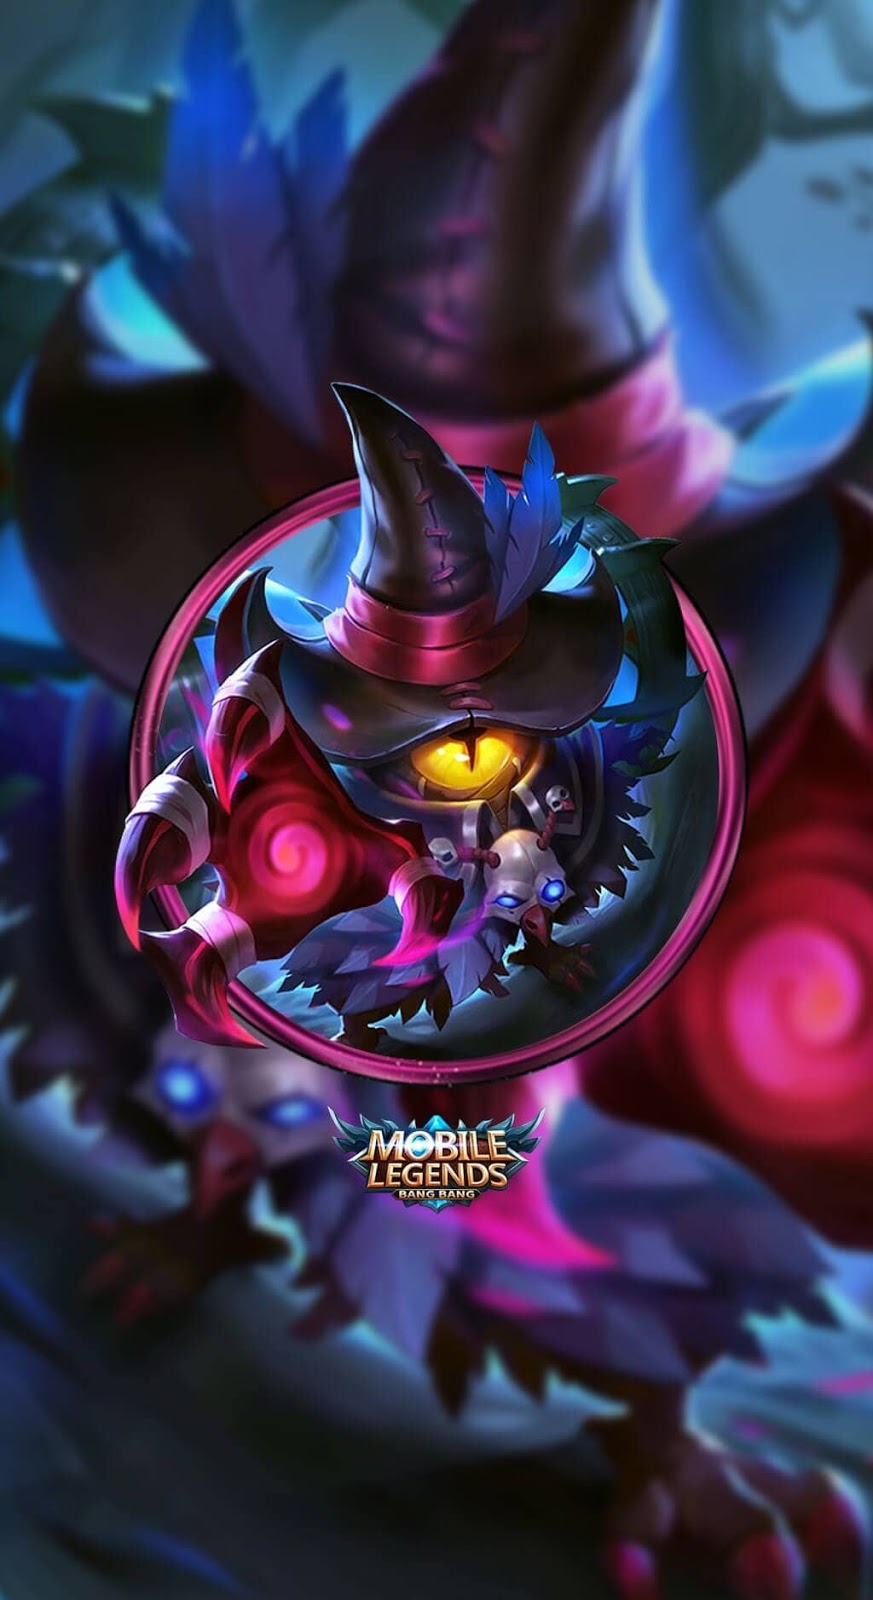 15+ Wallpaper Cyclops Mobile Legends (ML) Full HD for PC, Android, iOS